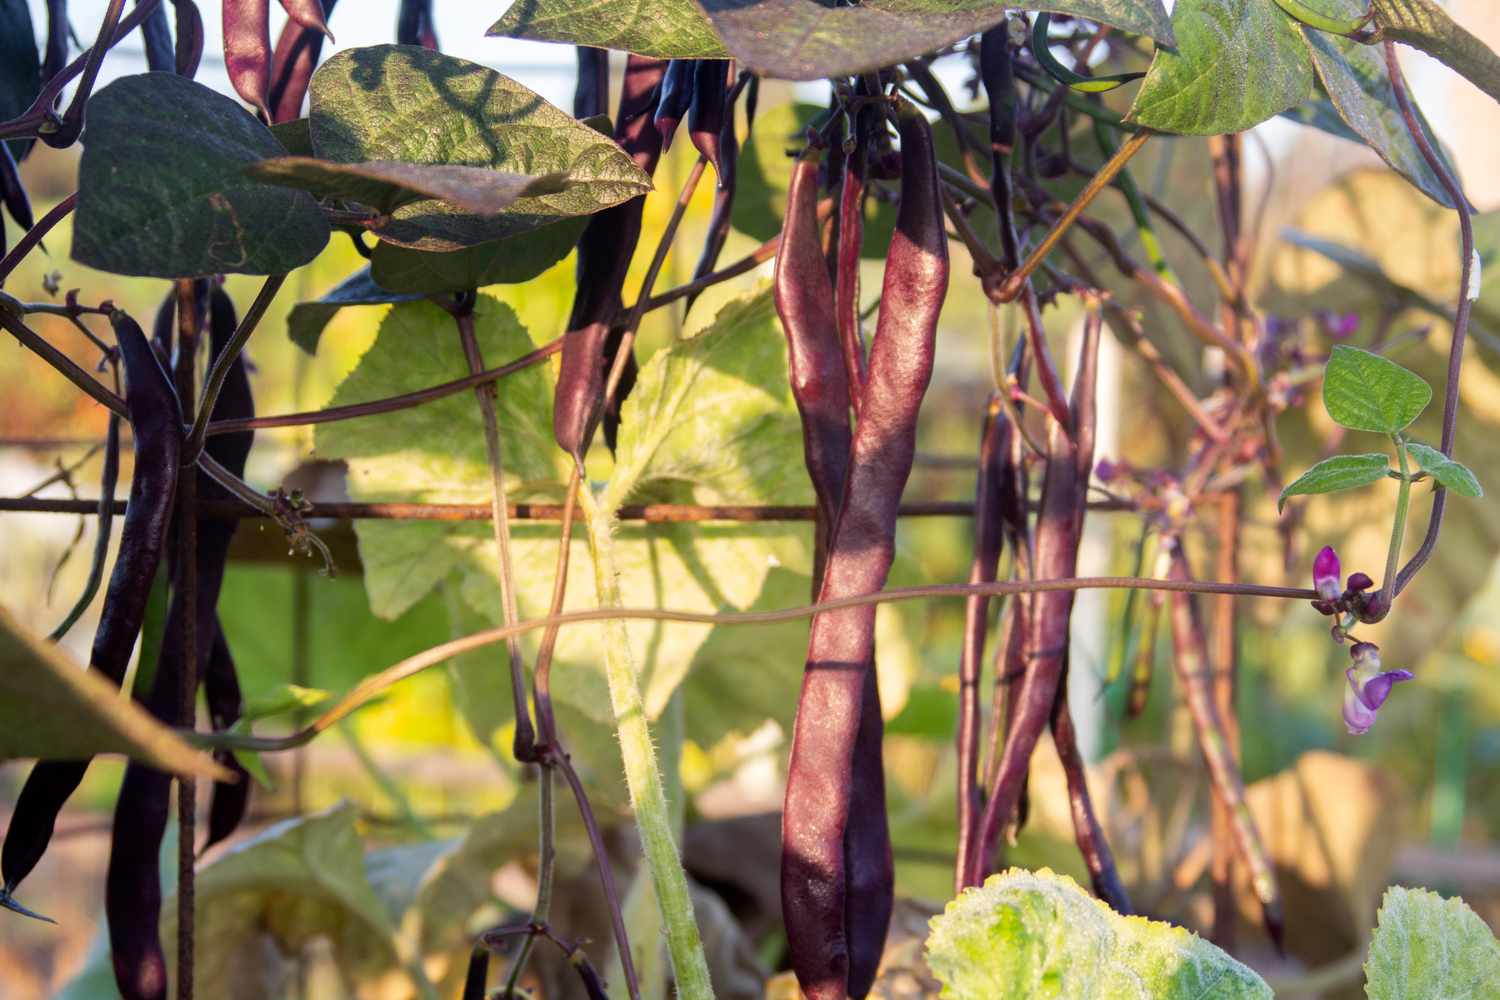 Purple podded hierloom pole beans with purple-brown colored bean pods hanging from vines closeup